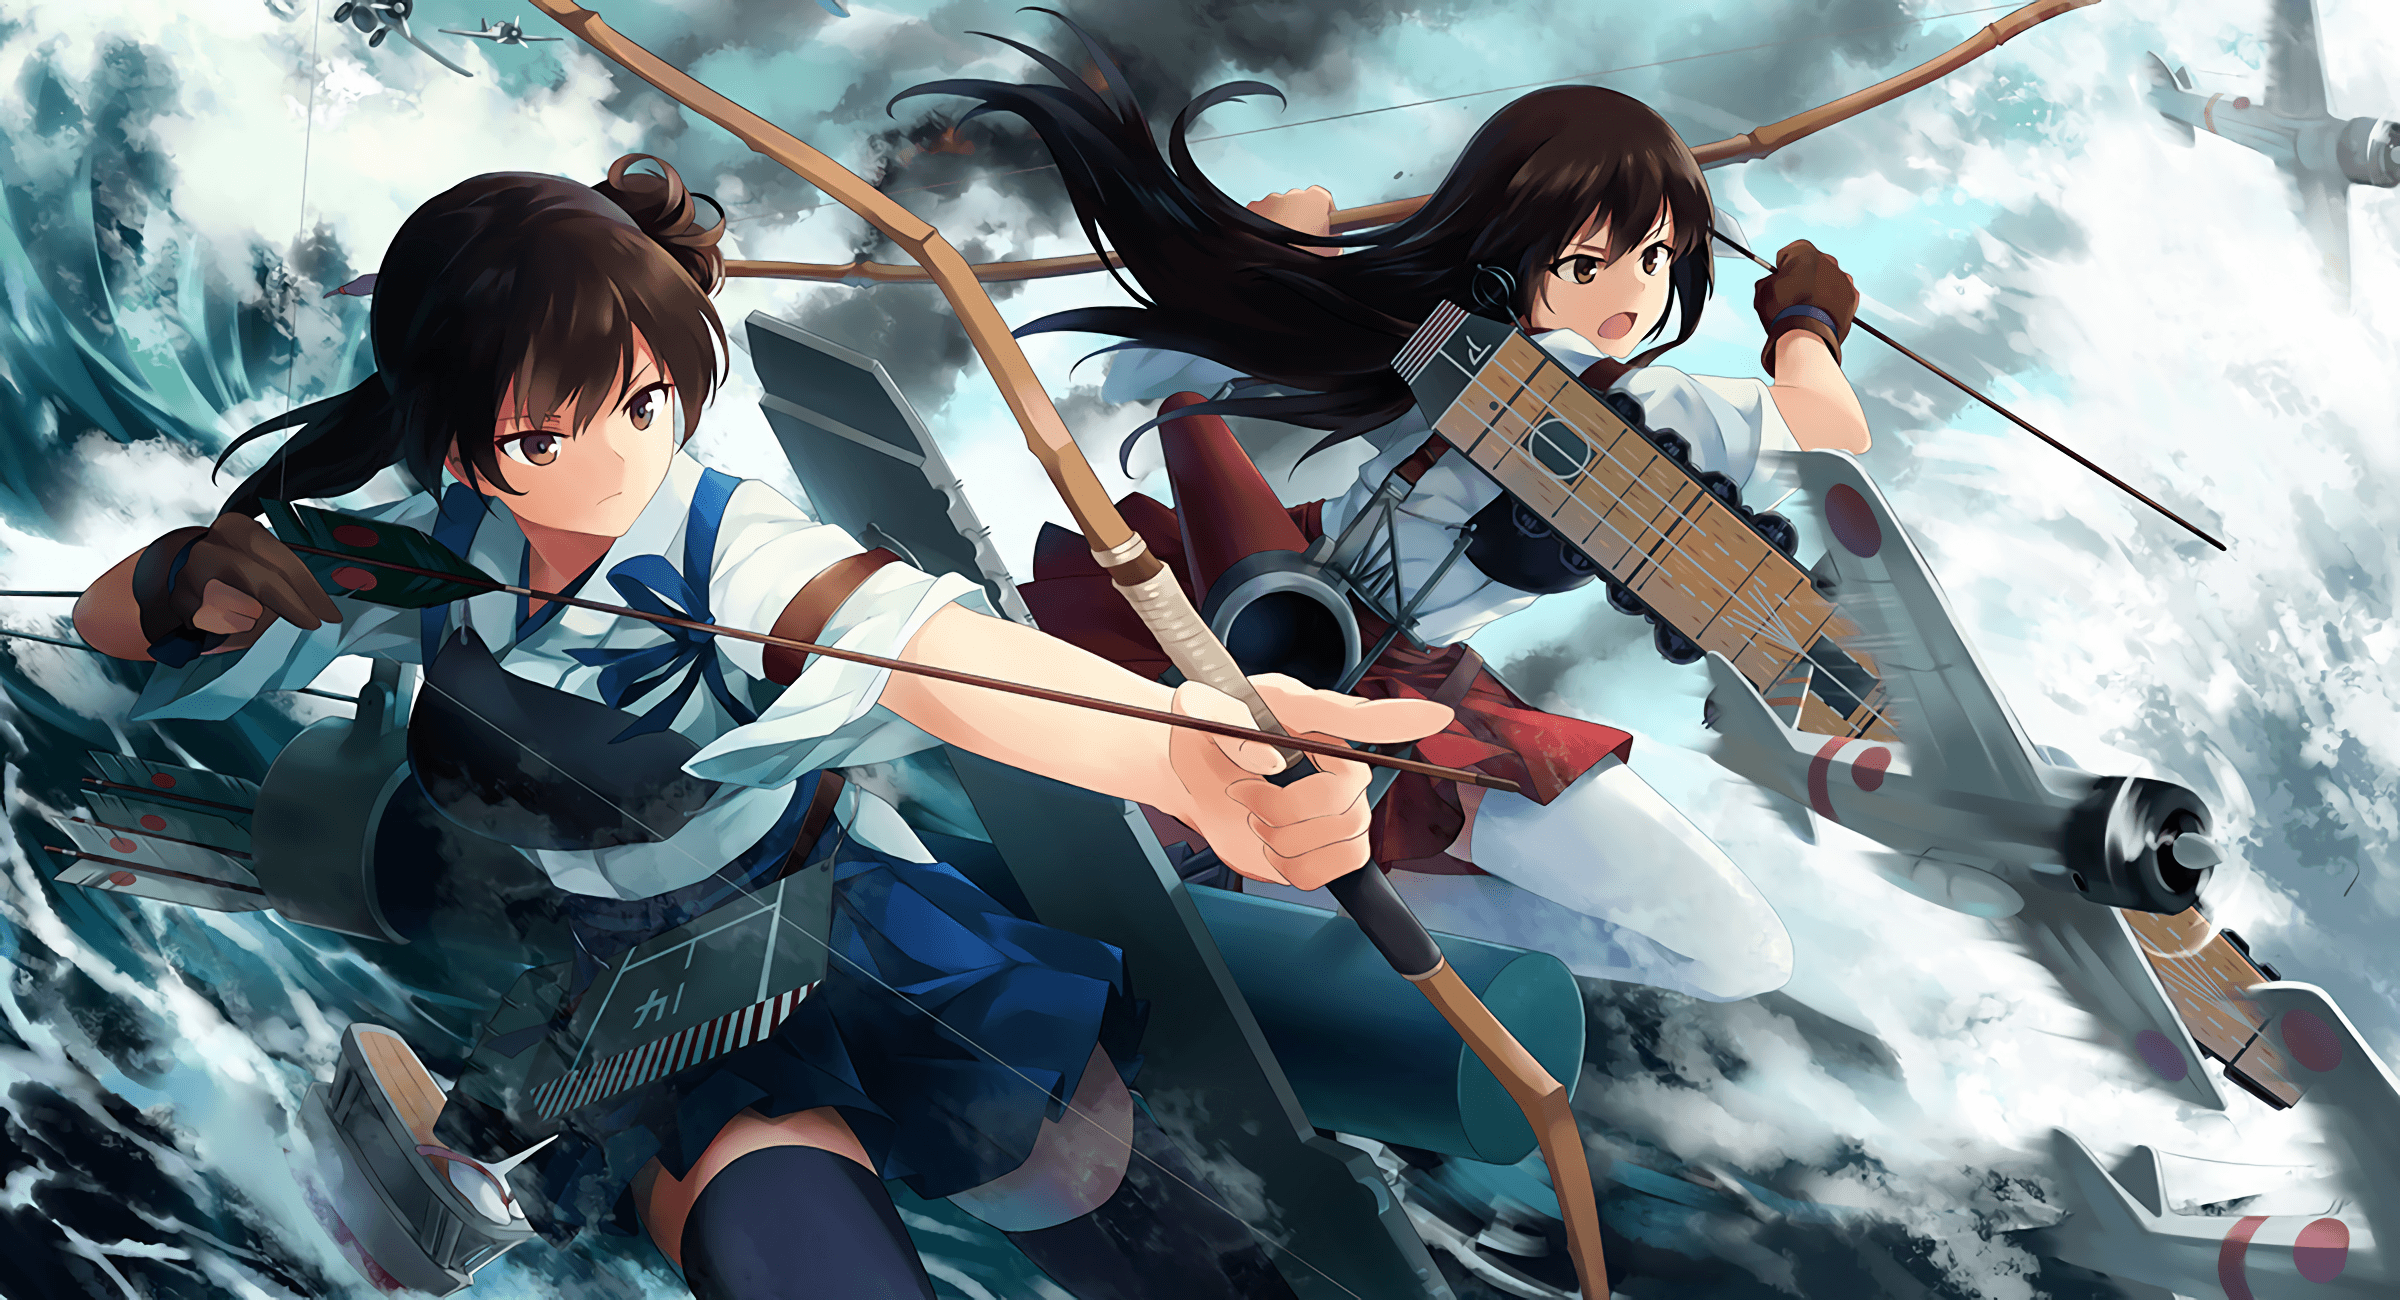 KanColle Wallpapers - Wallpaper Cave Kancolle Wallpaper.